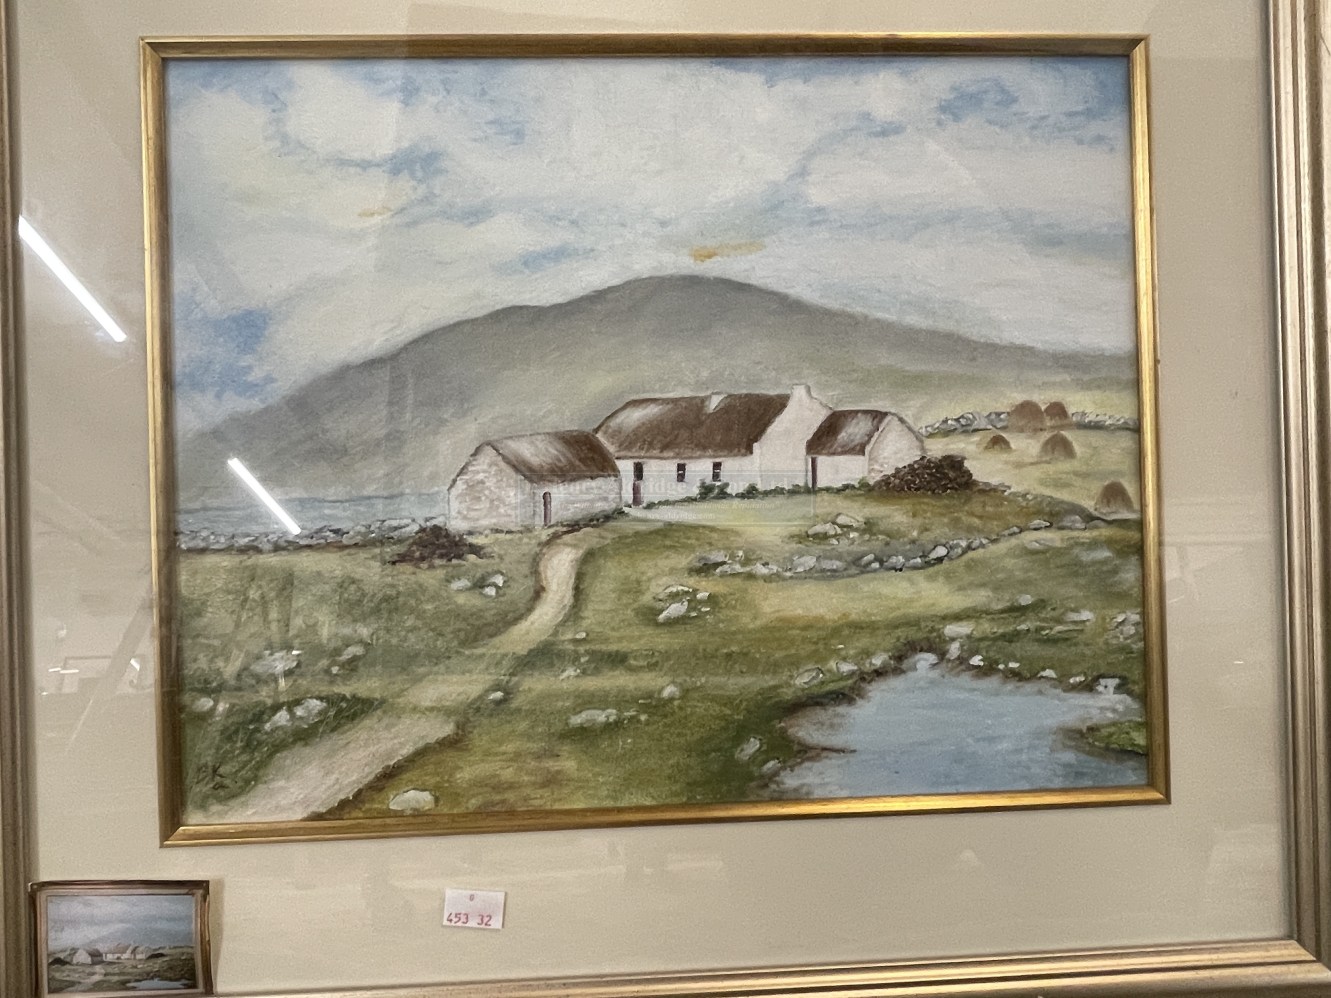 20th cent. Irish School O.O.B. "Cottages" monogram lower right B.K. 04, another Sheep in a Landscape